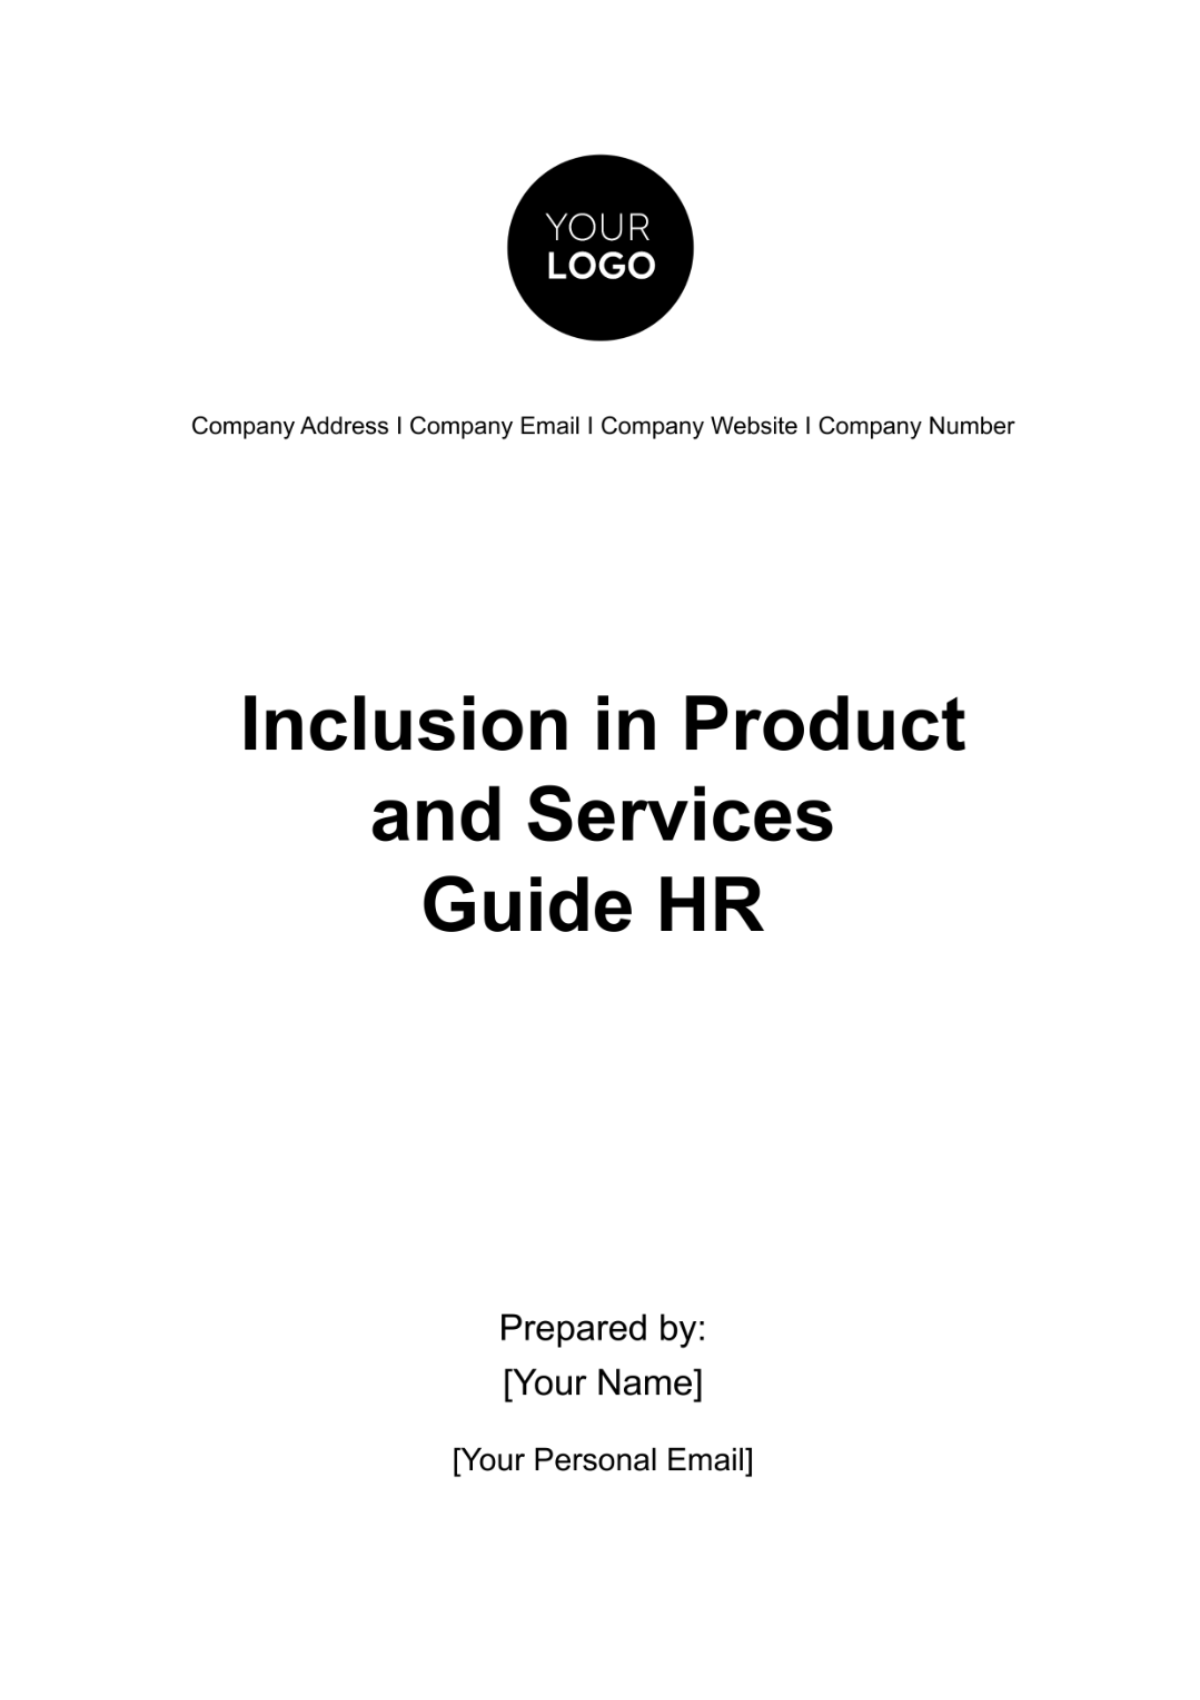 Inclusion in Product and Services Guide HR Template